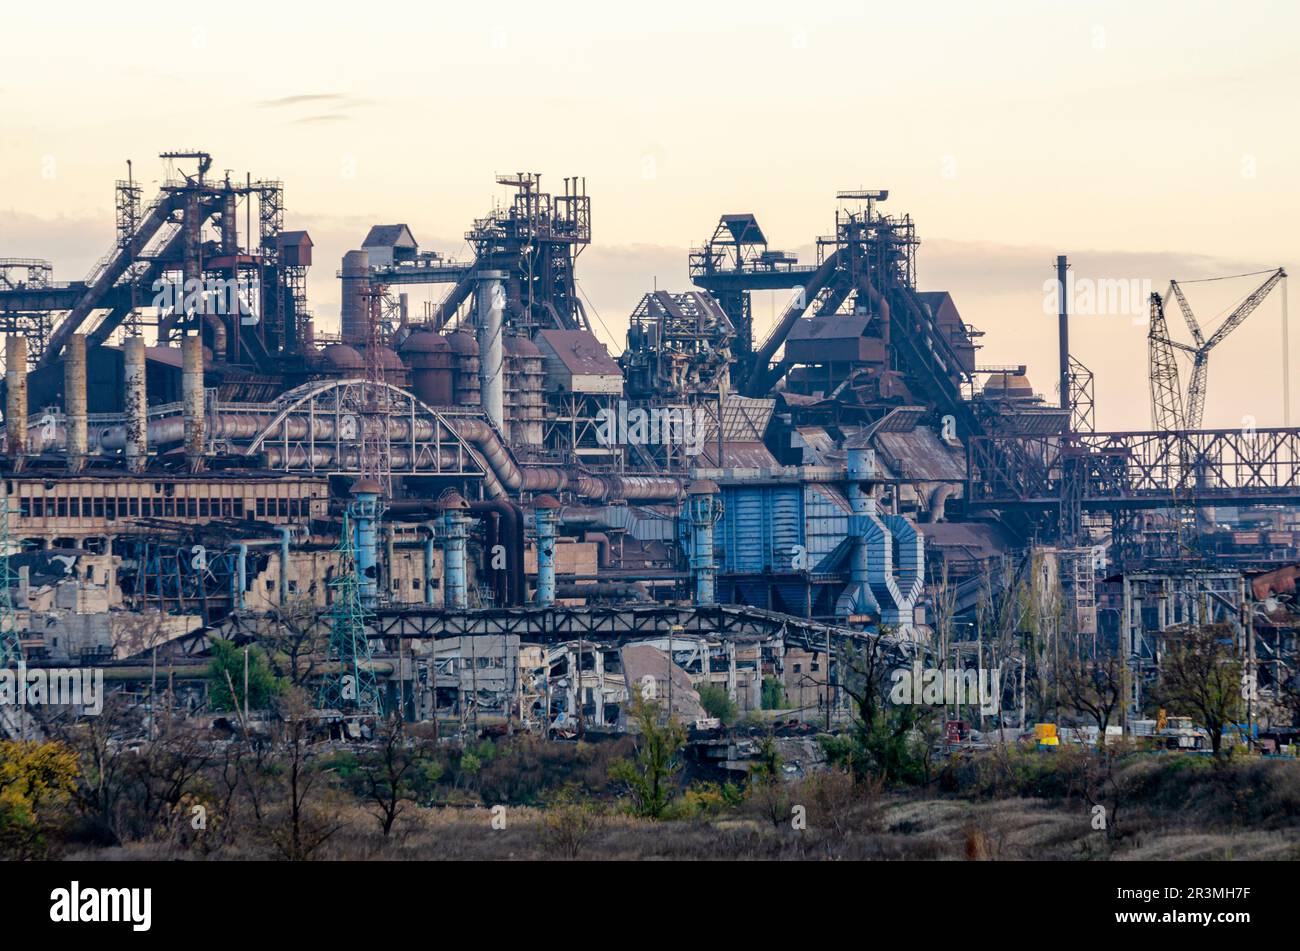 Azovstal plant destroyed during the war in Mariupol Ukraine Stock Photo